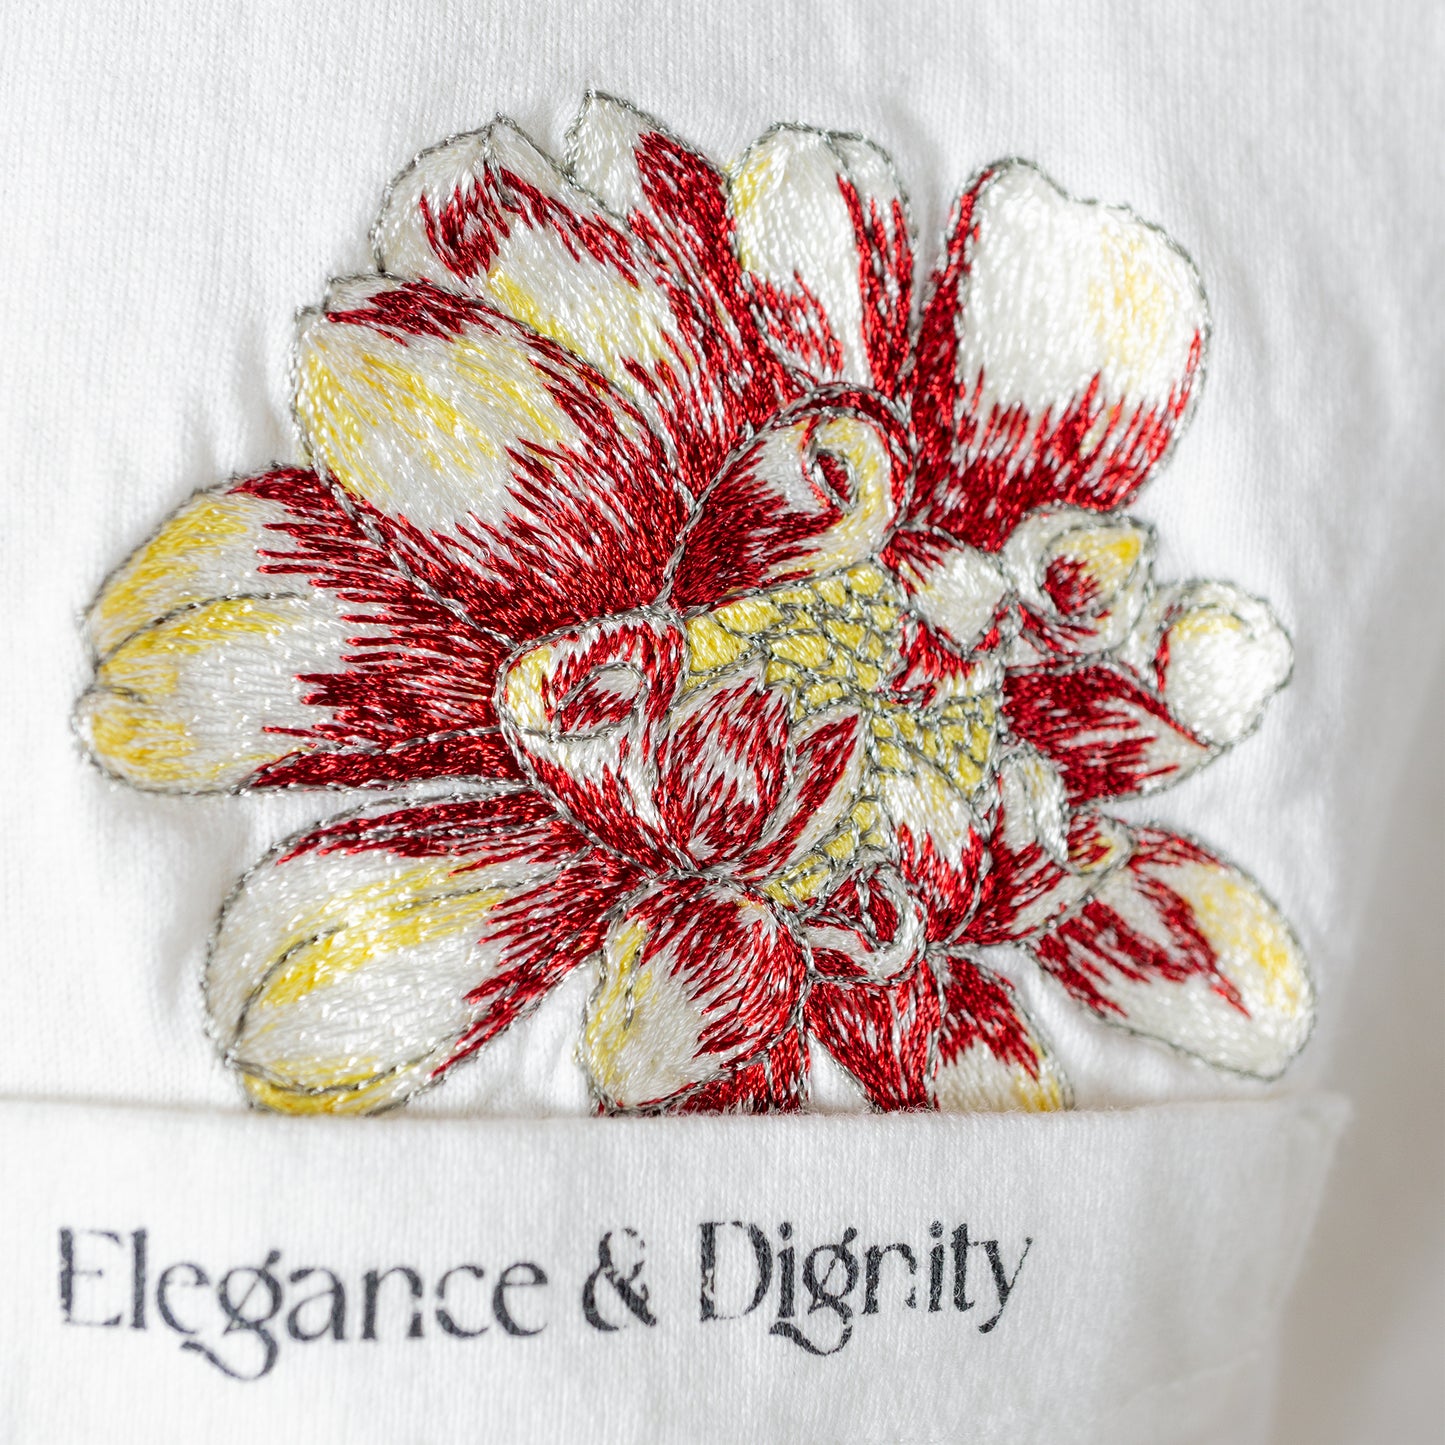 24SS TICCA DAHLIA EMBROIDERY FRENCH T